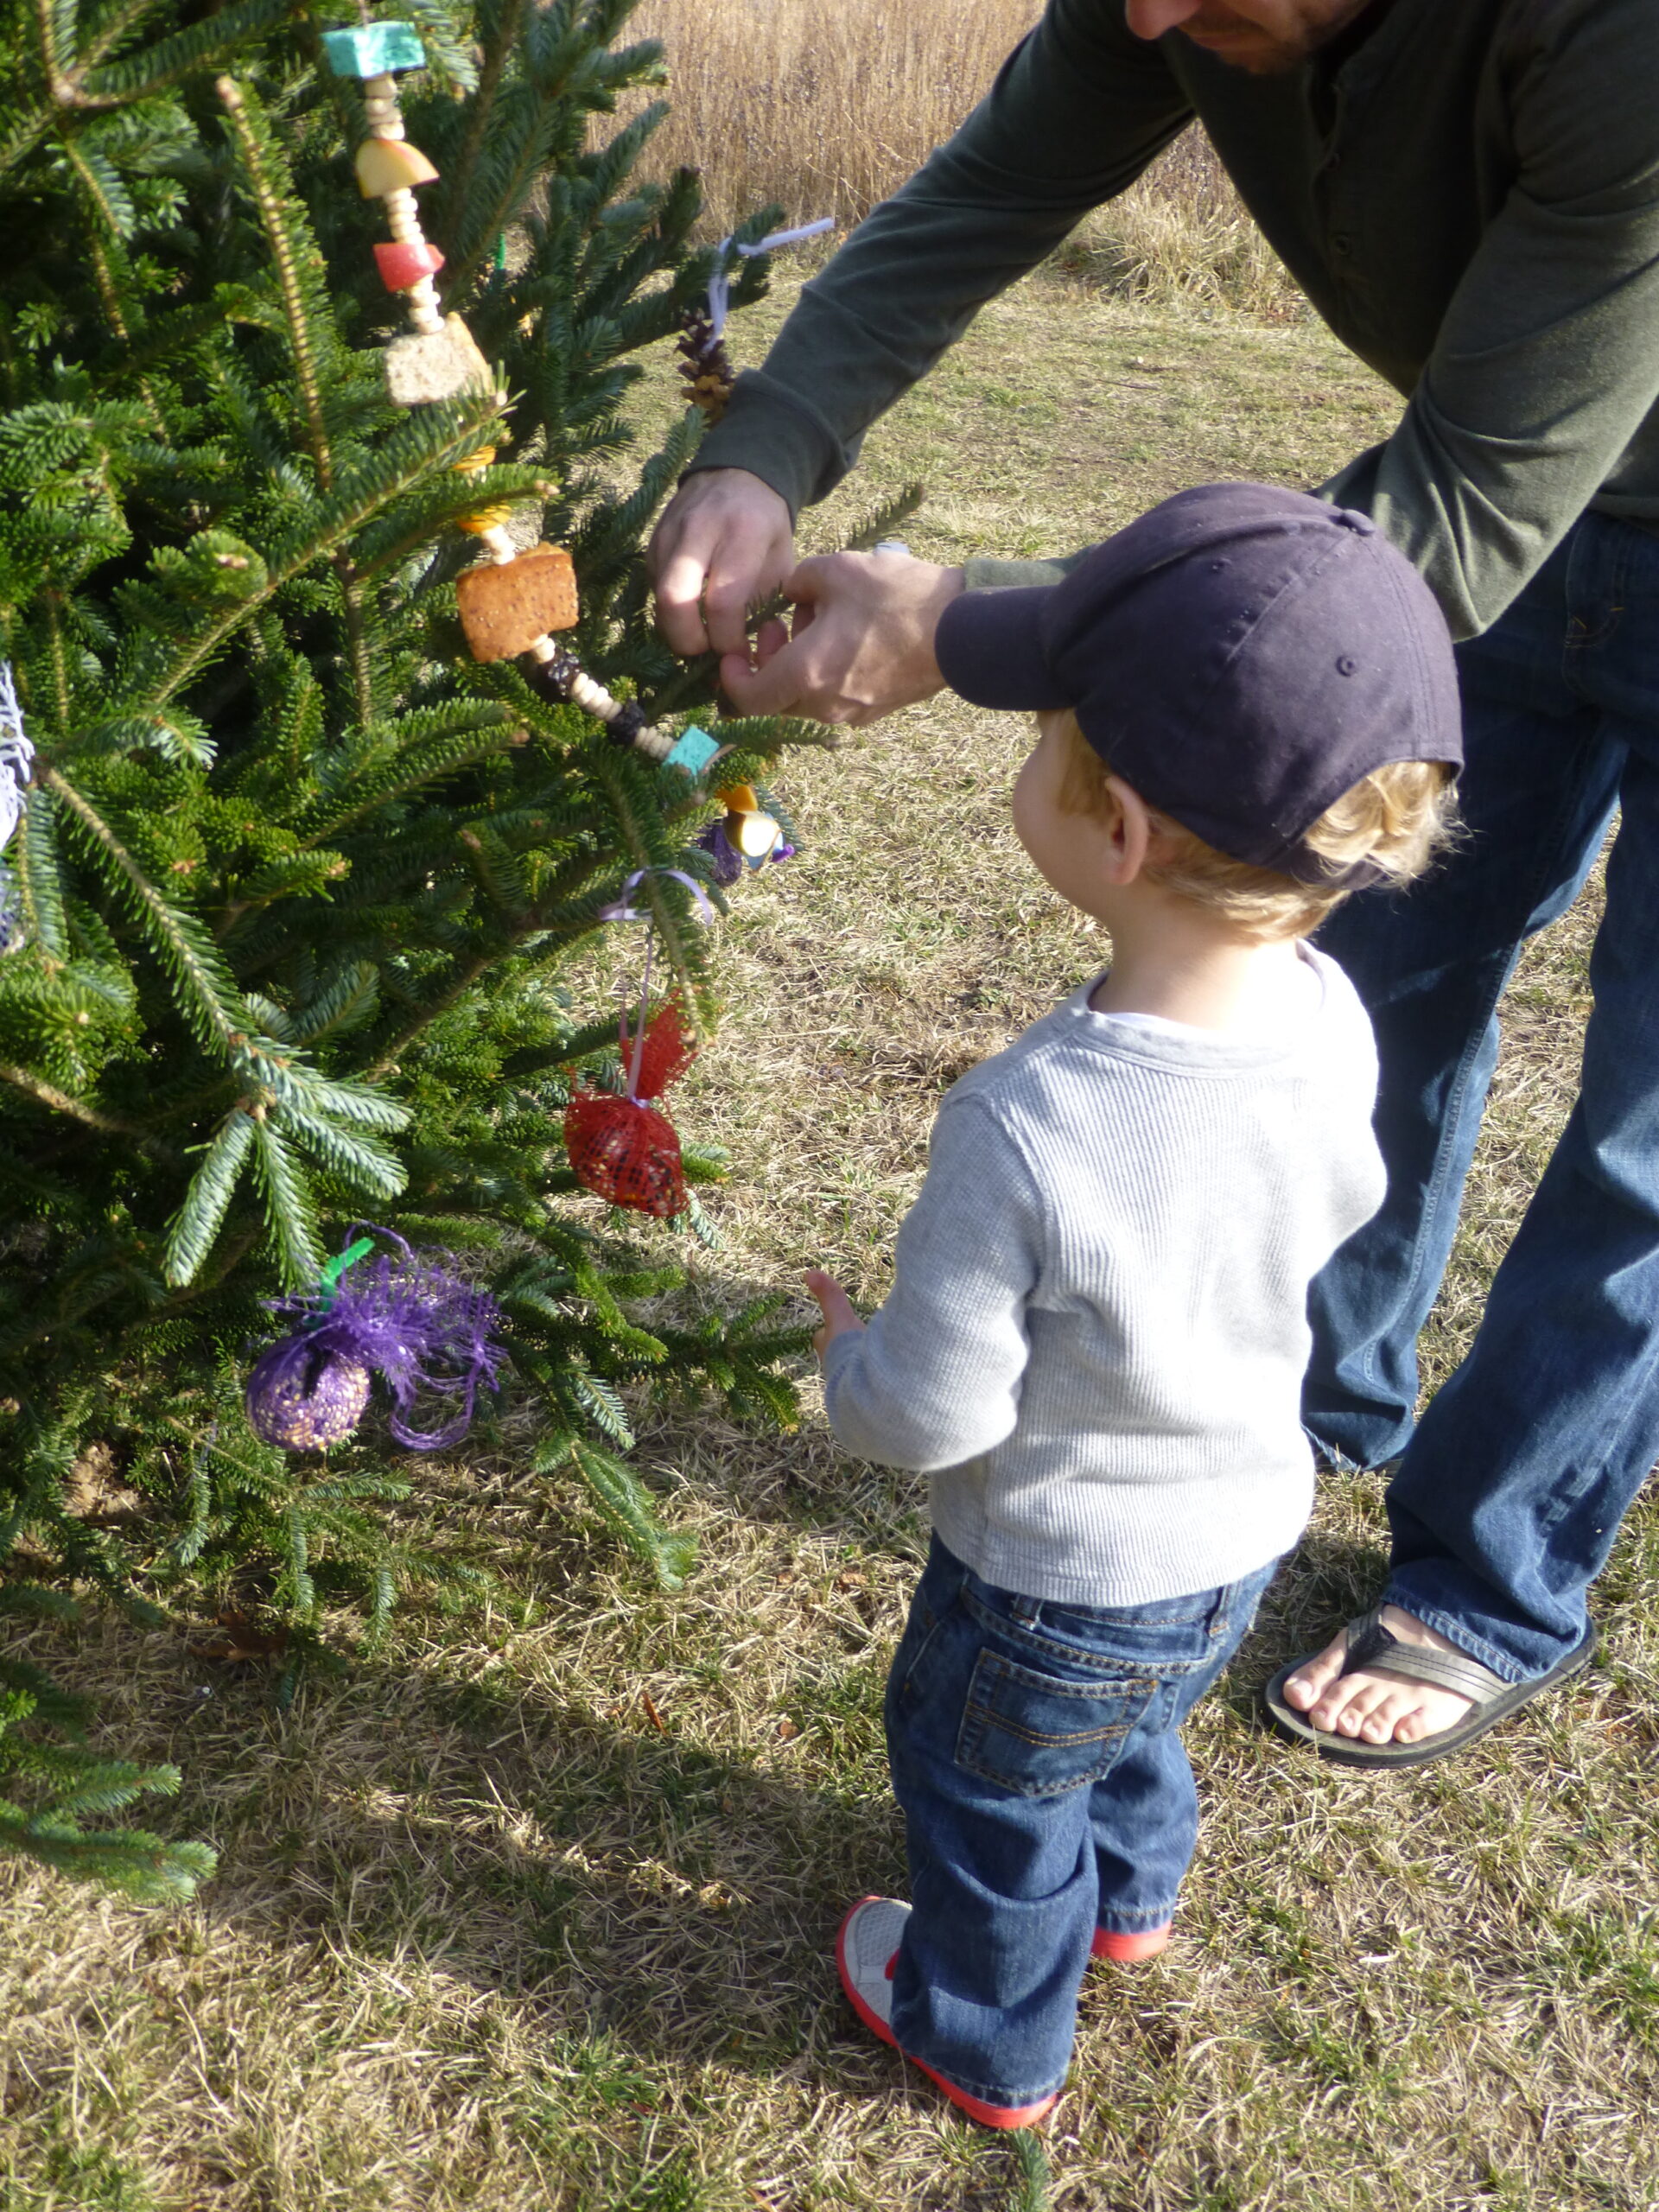 Decorate a Holiday Tree for the Birds at the South Fork Natural History Museum (SOFO) and learn how to make bird-friendly decorations. 
December 10, 10:30 a.m. Reservations required. COURTESY SOFO